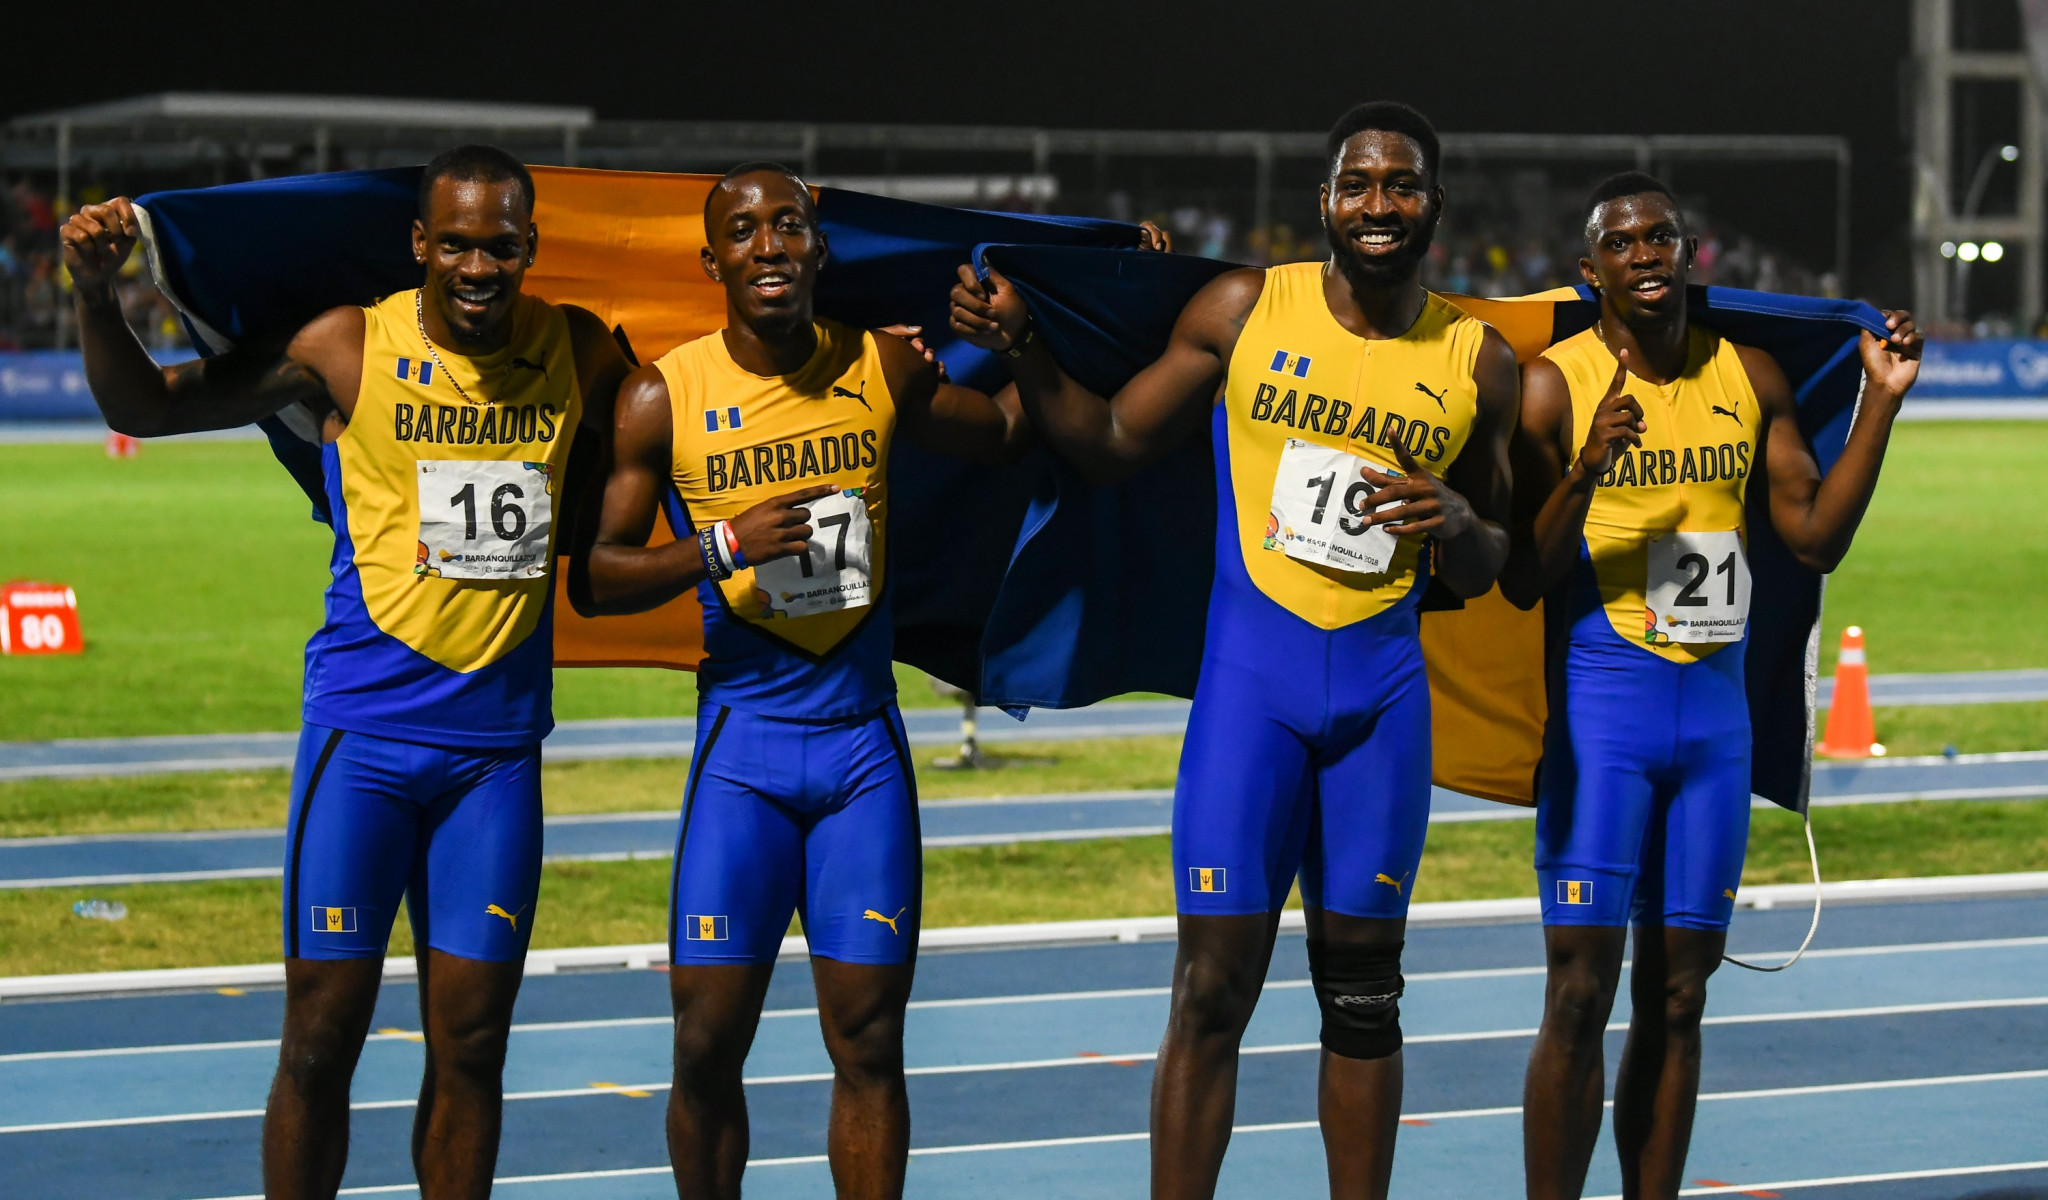 Barbados dazzled in the 4x100m relay in Barranquilla ©Getty Images